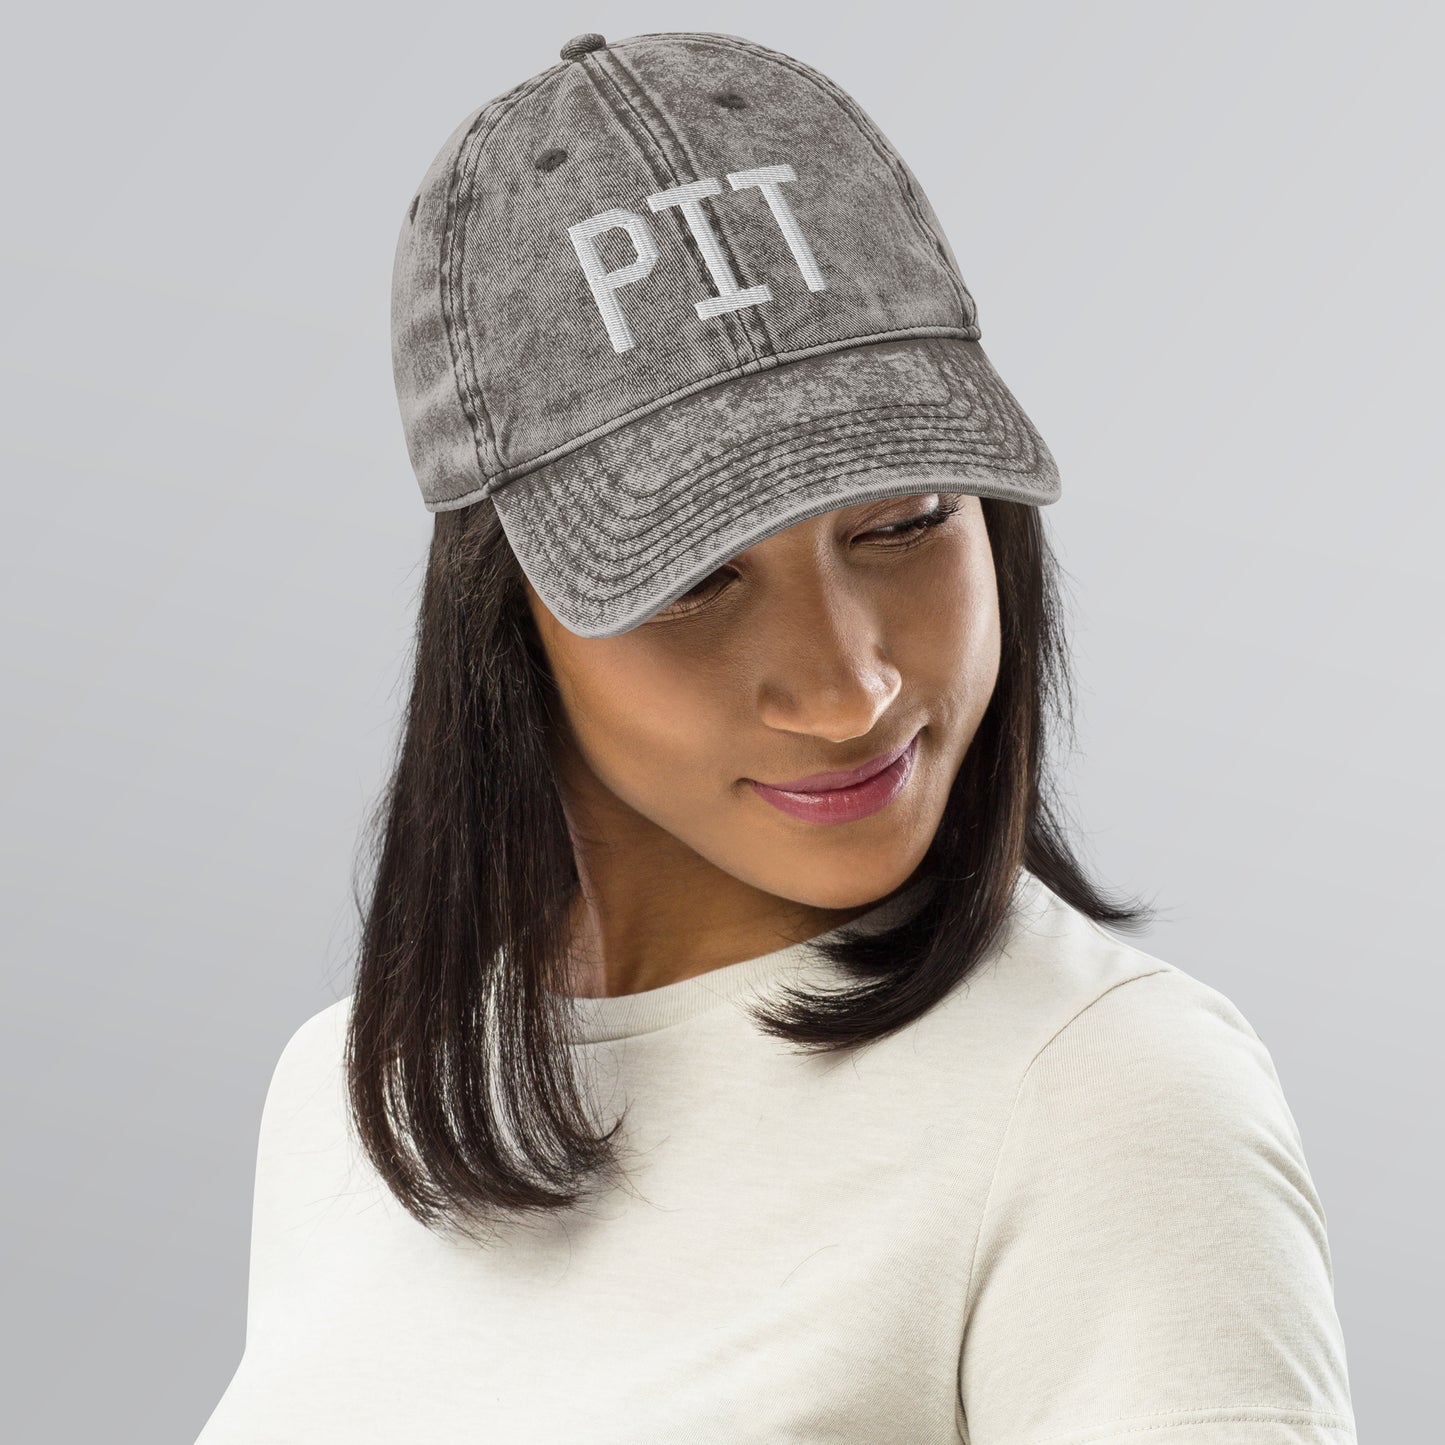 Airport Code Twill Cap - White • PIT Pittsburgh • YHM Designs - Image 11